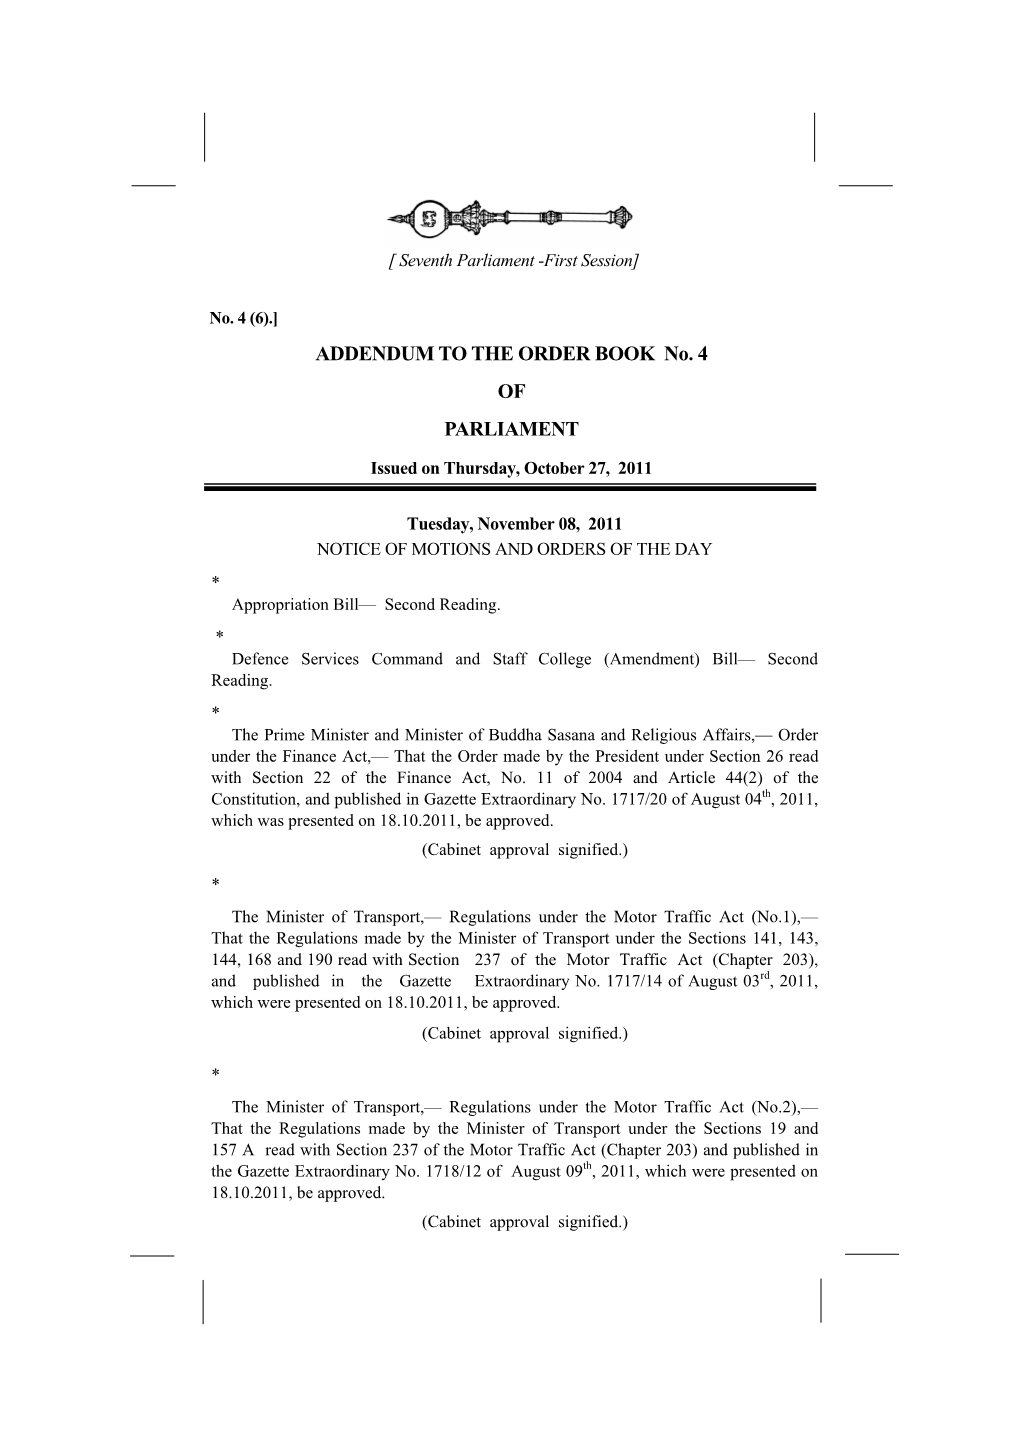 ADDENDUM to the ORDER BOOK No. 4 of PARLIAMENT